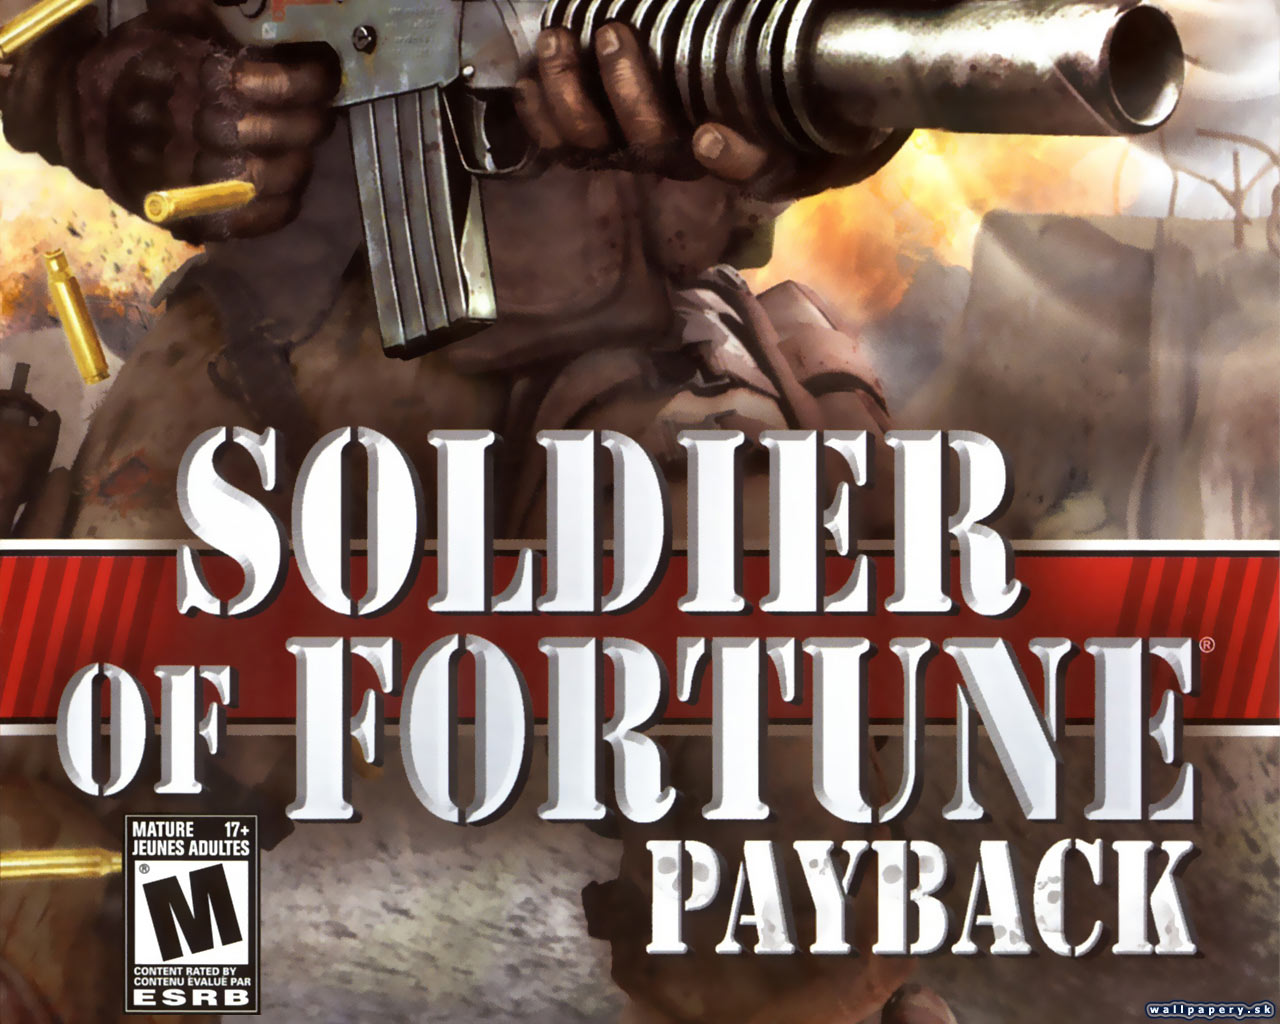 Soldier of Fortune 3: PayBack - wallpaper 2